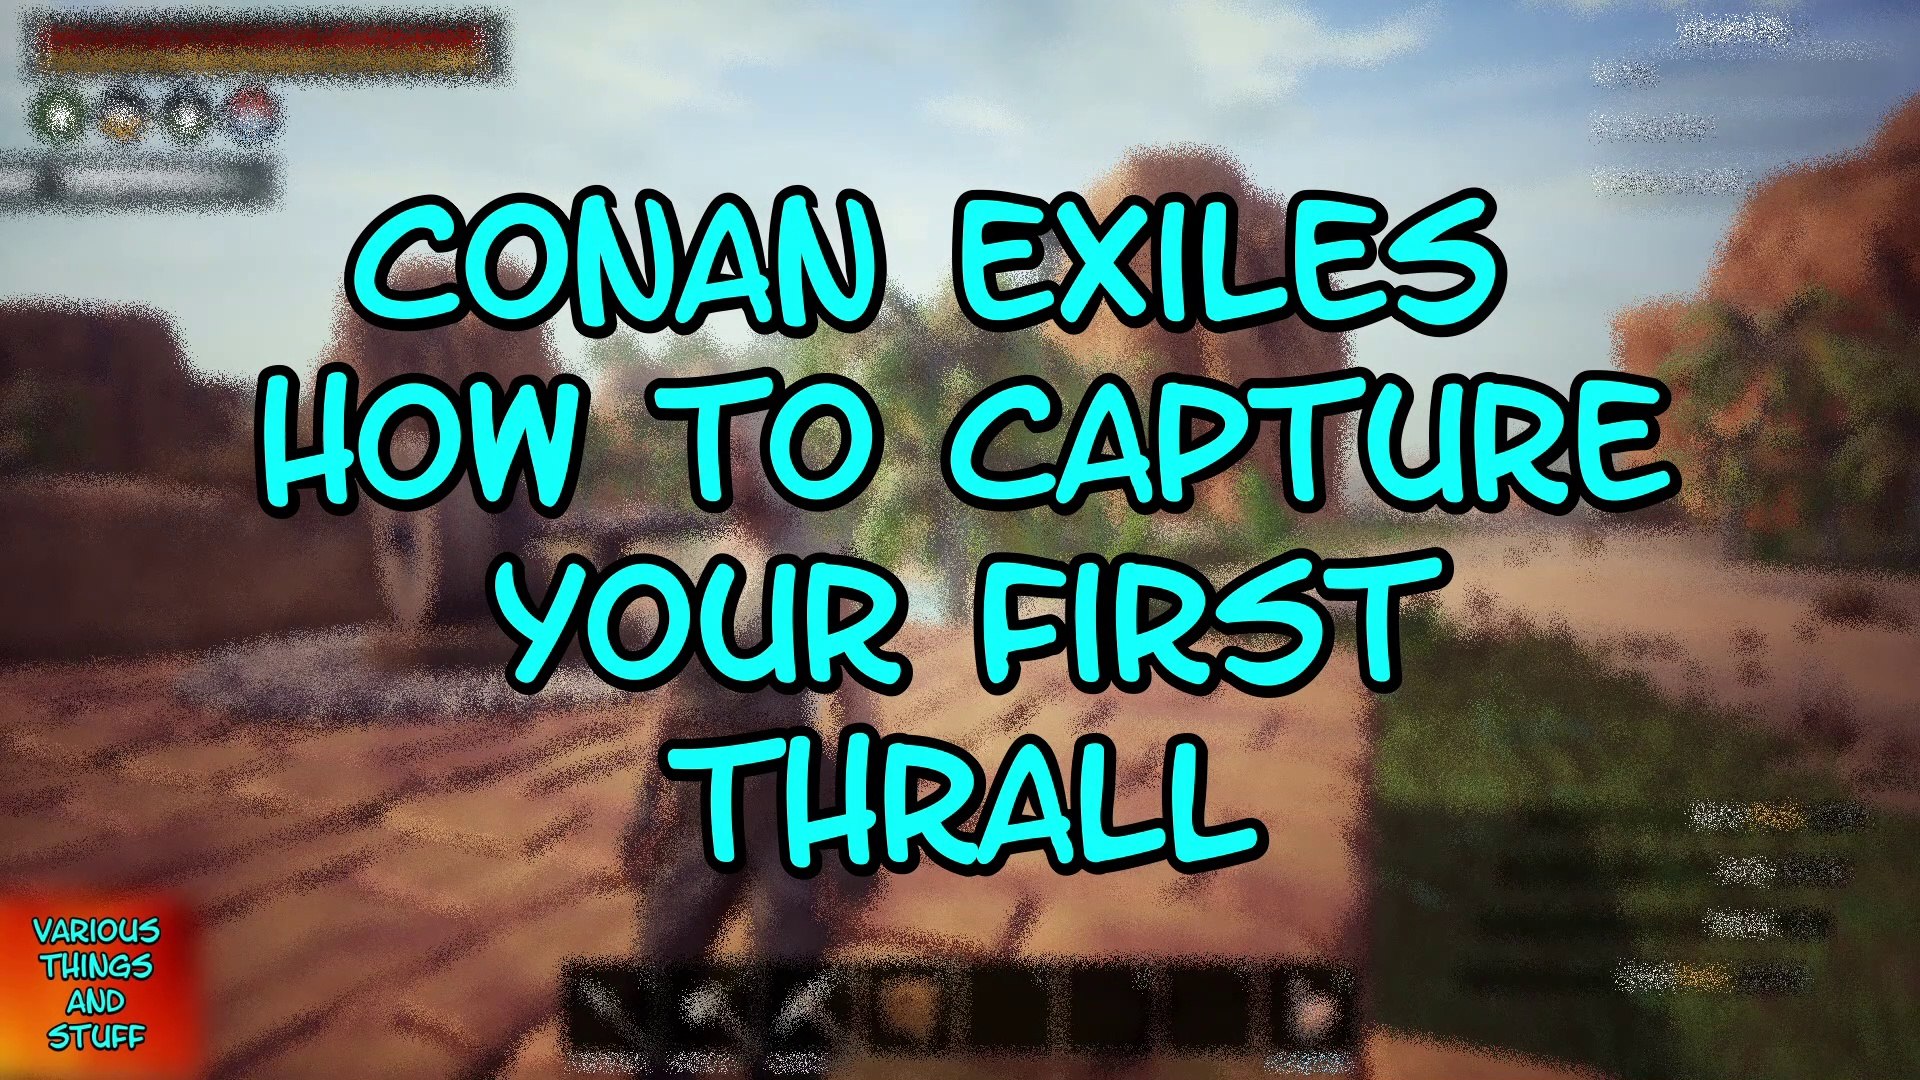 Conan Exiles How to Capture Your First Thrall - video Dailymotion